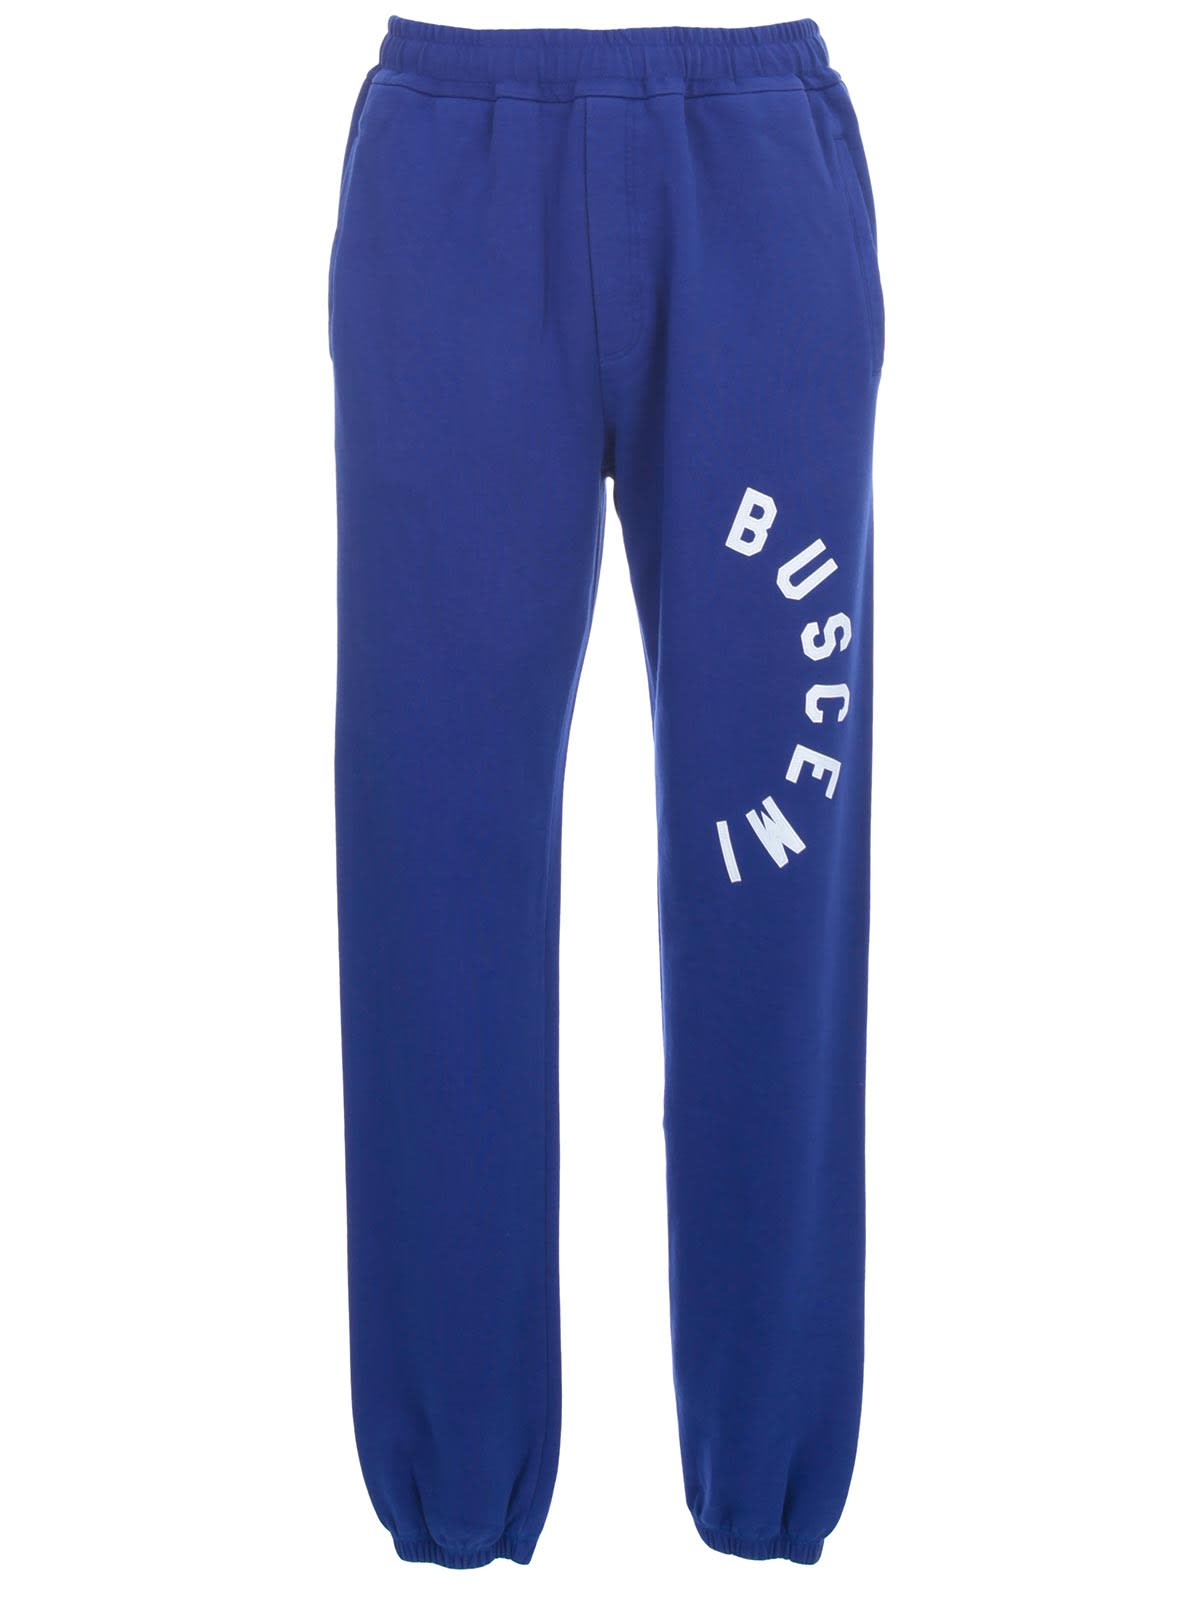 BUSCEMI TACKLE TWILL PRINTED SWEATtrousers,11221401